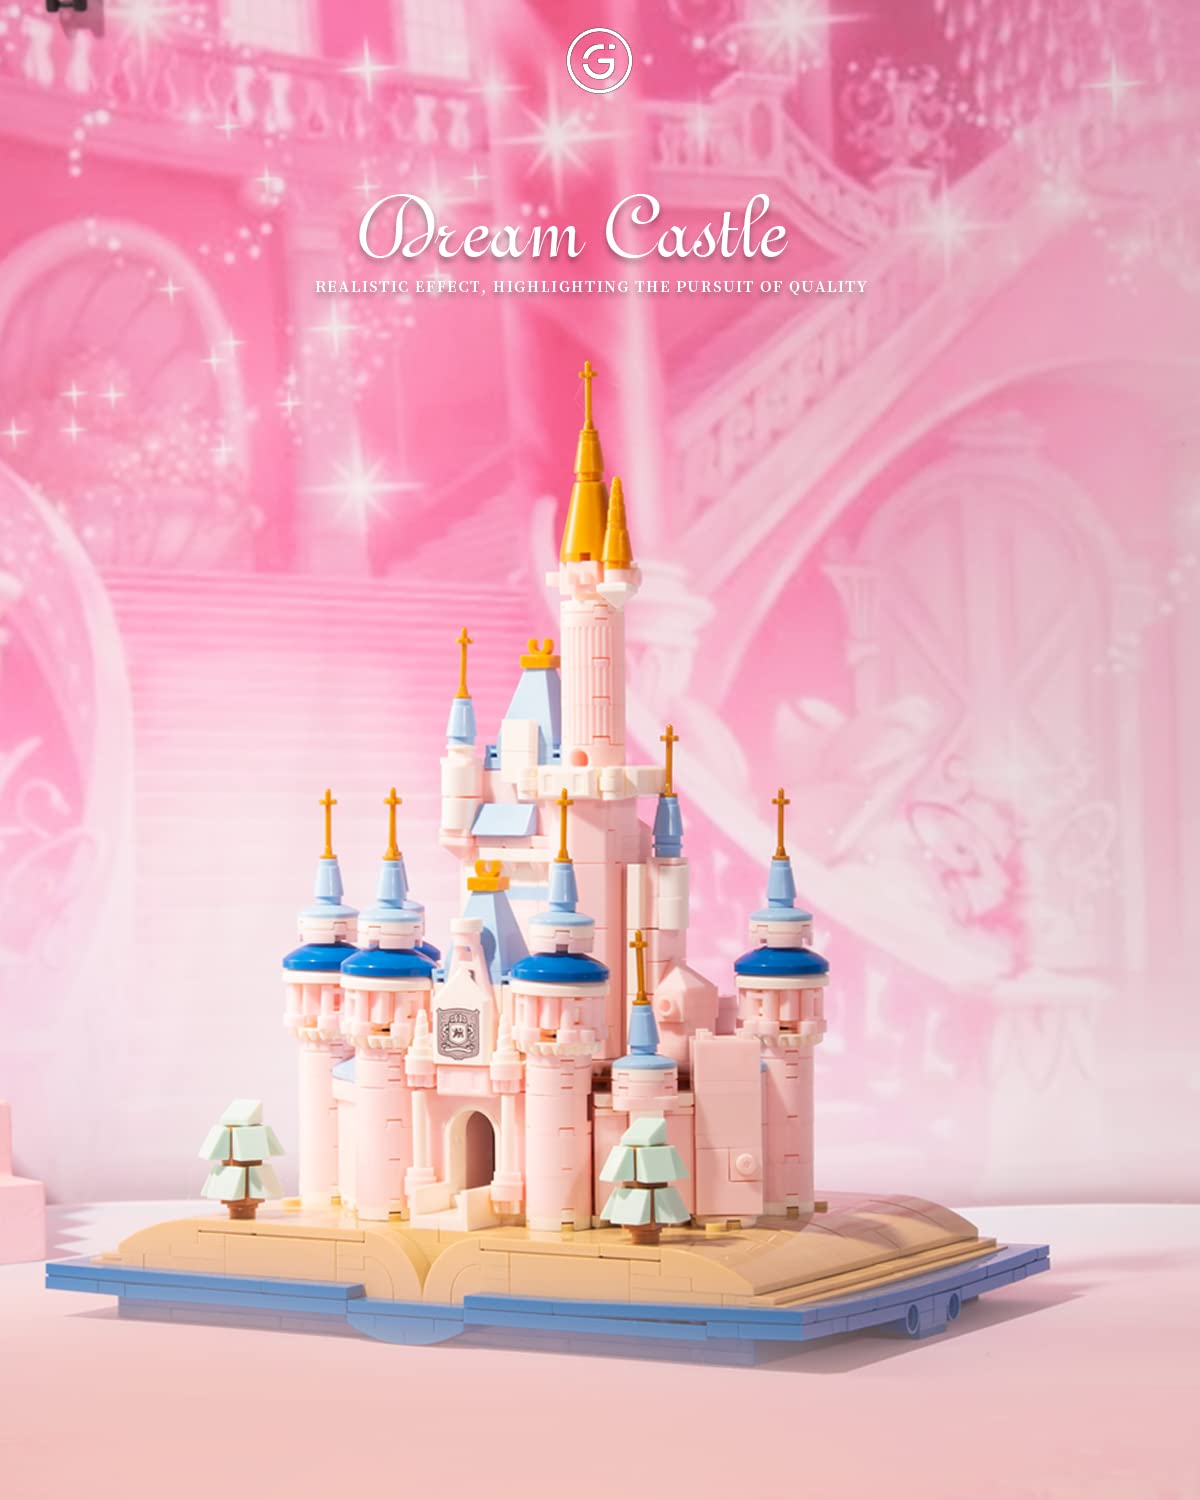 Givenni Princess Ultimate Adventure Castle; Building Toy Set for Kids Age 8-14 Yrs, Creative Building Block Set 635pcs,Girl Toys for Christmas and Birthday Gifts. （770PCS）